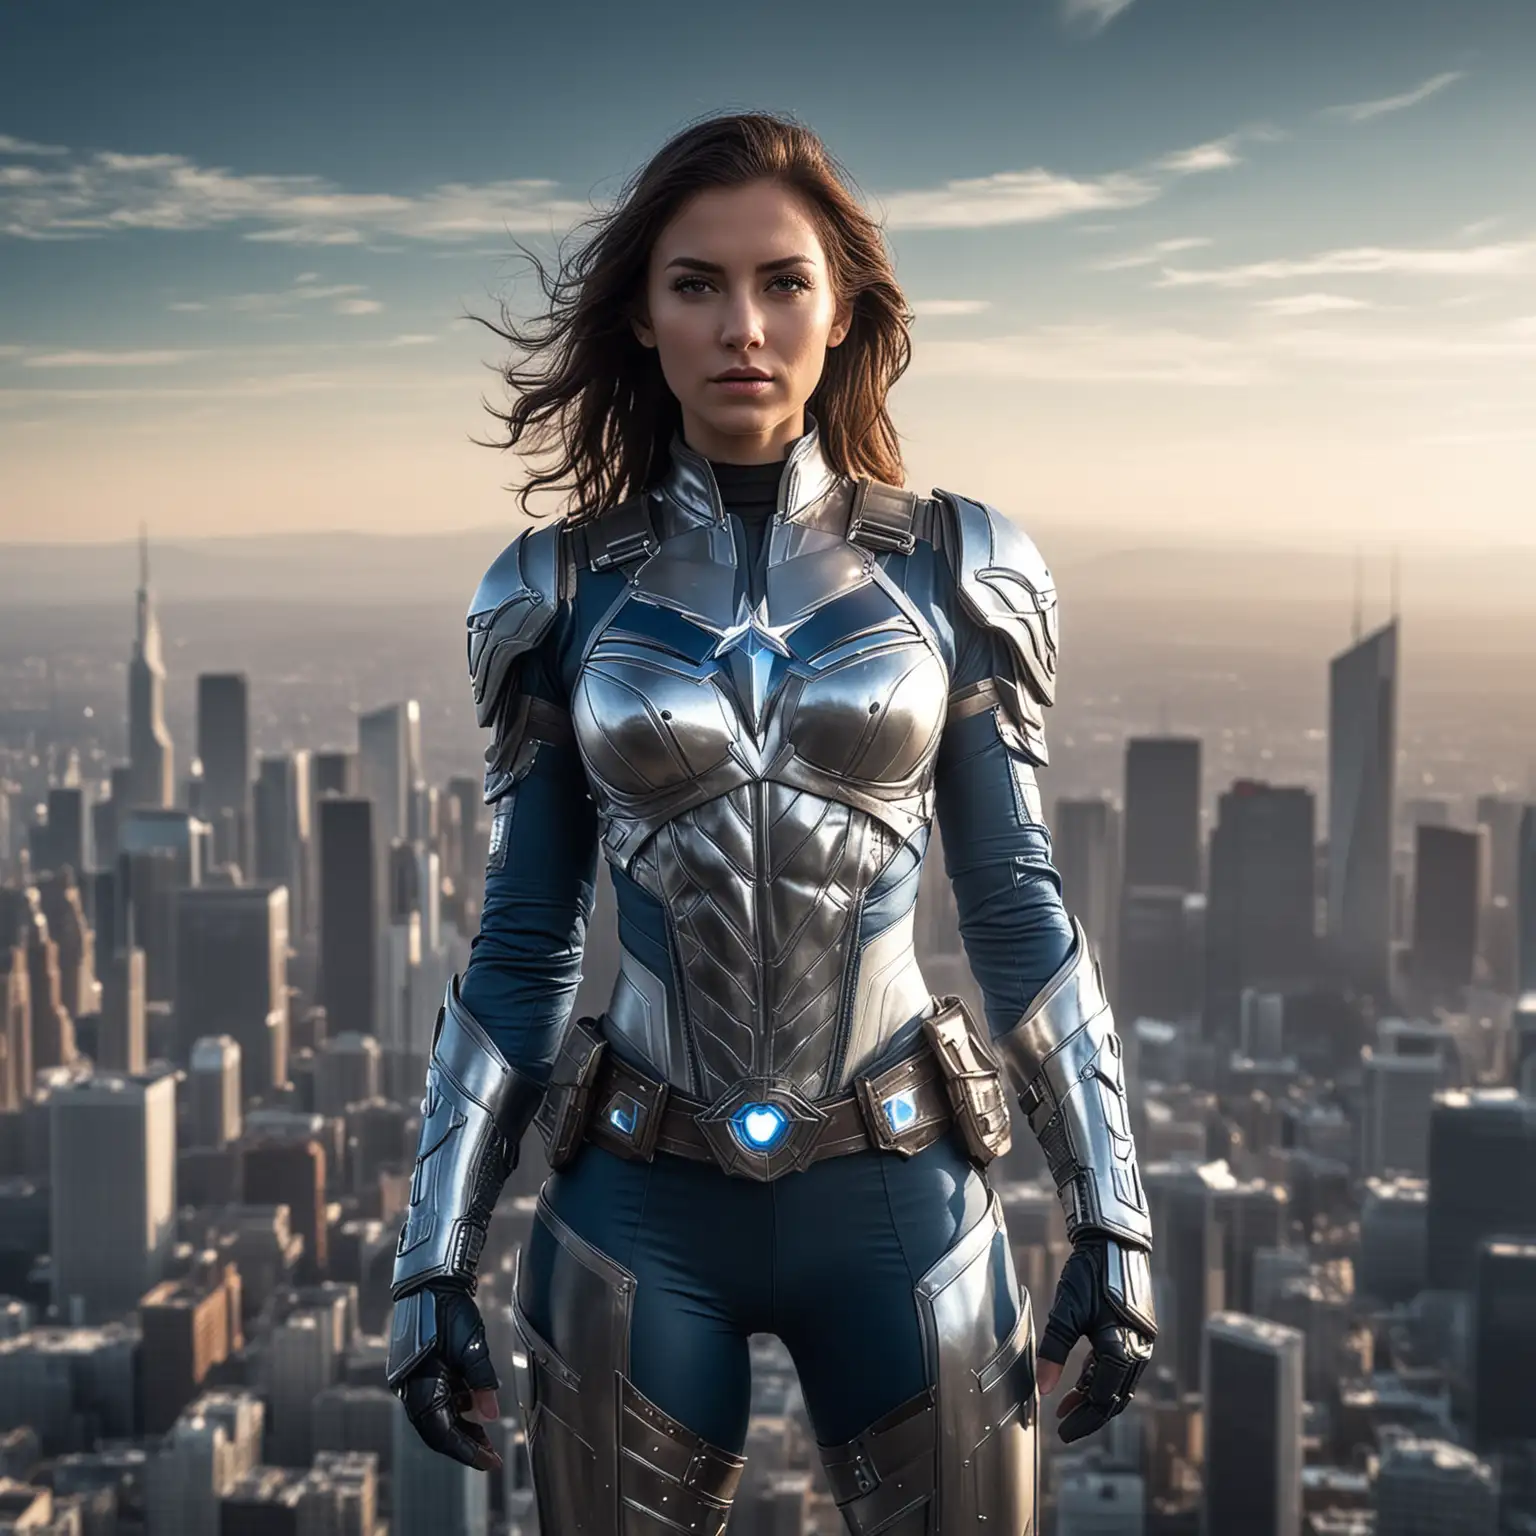 Superhero Woman in Silver and Blue Armor against Eclipse Skyline